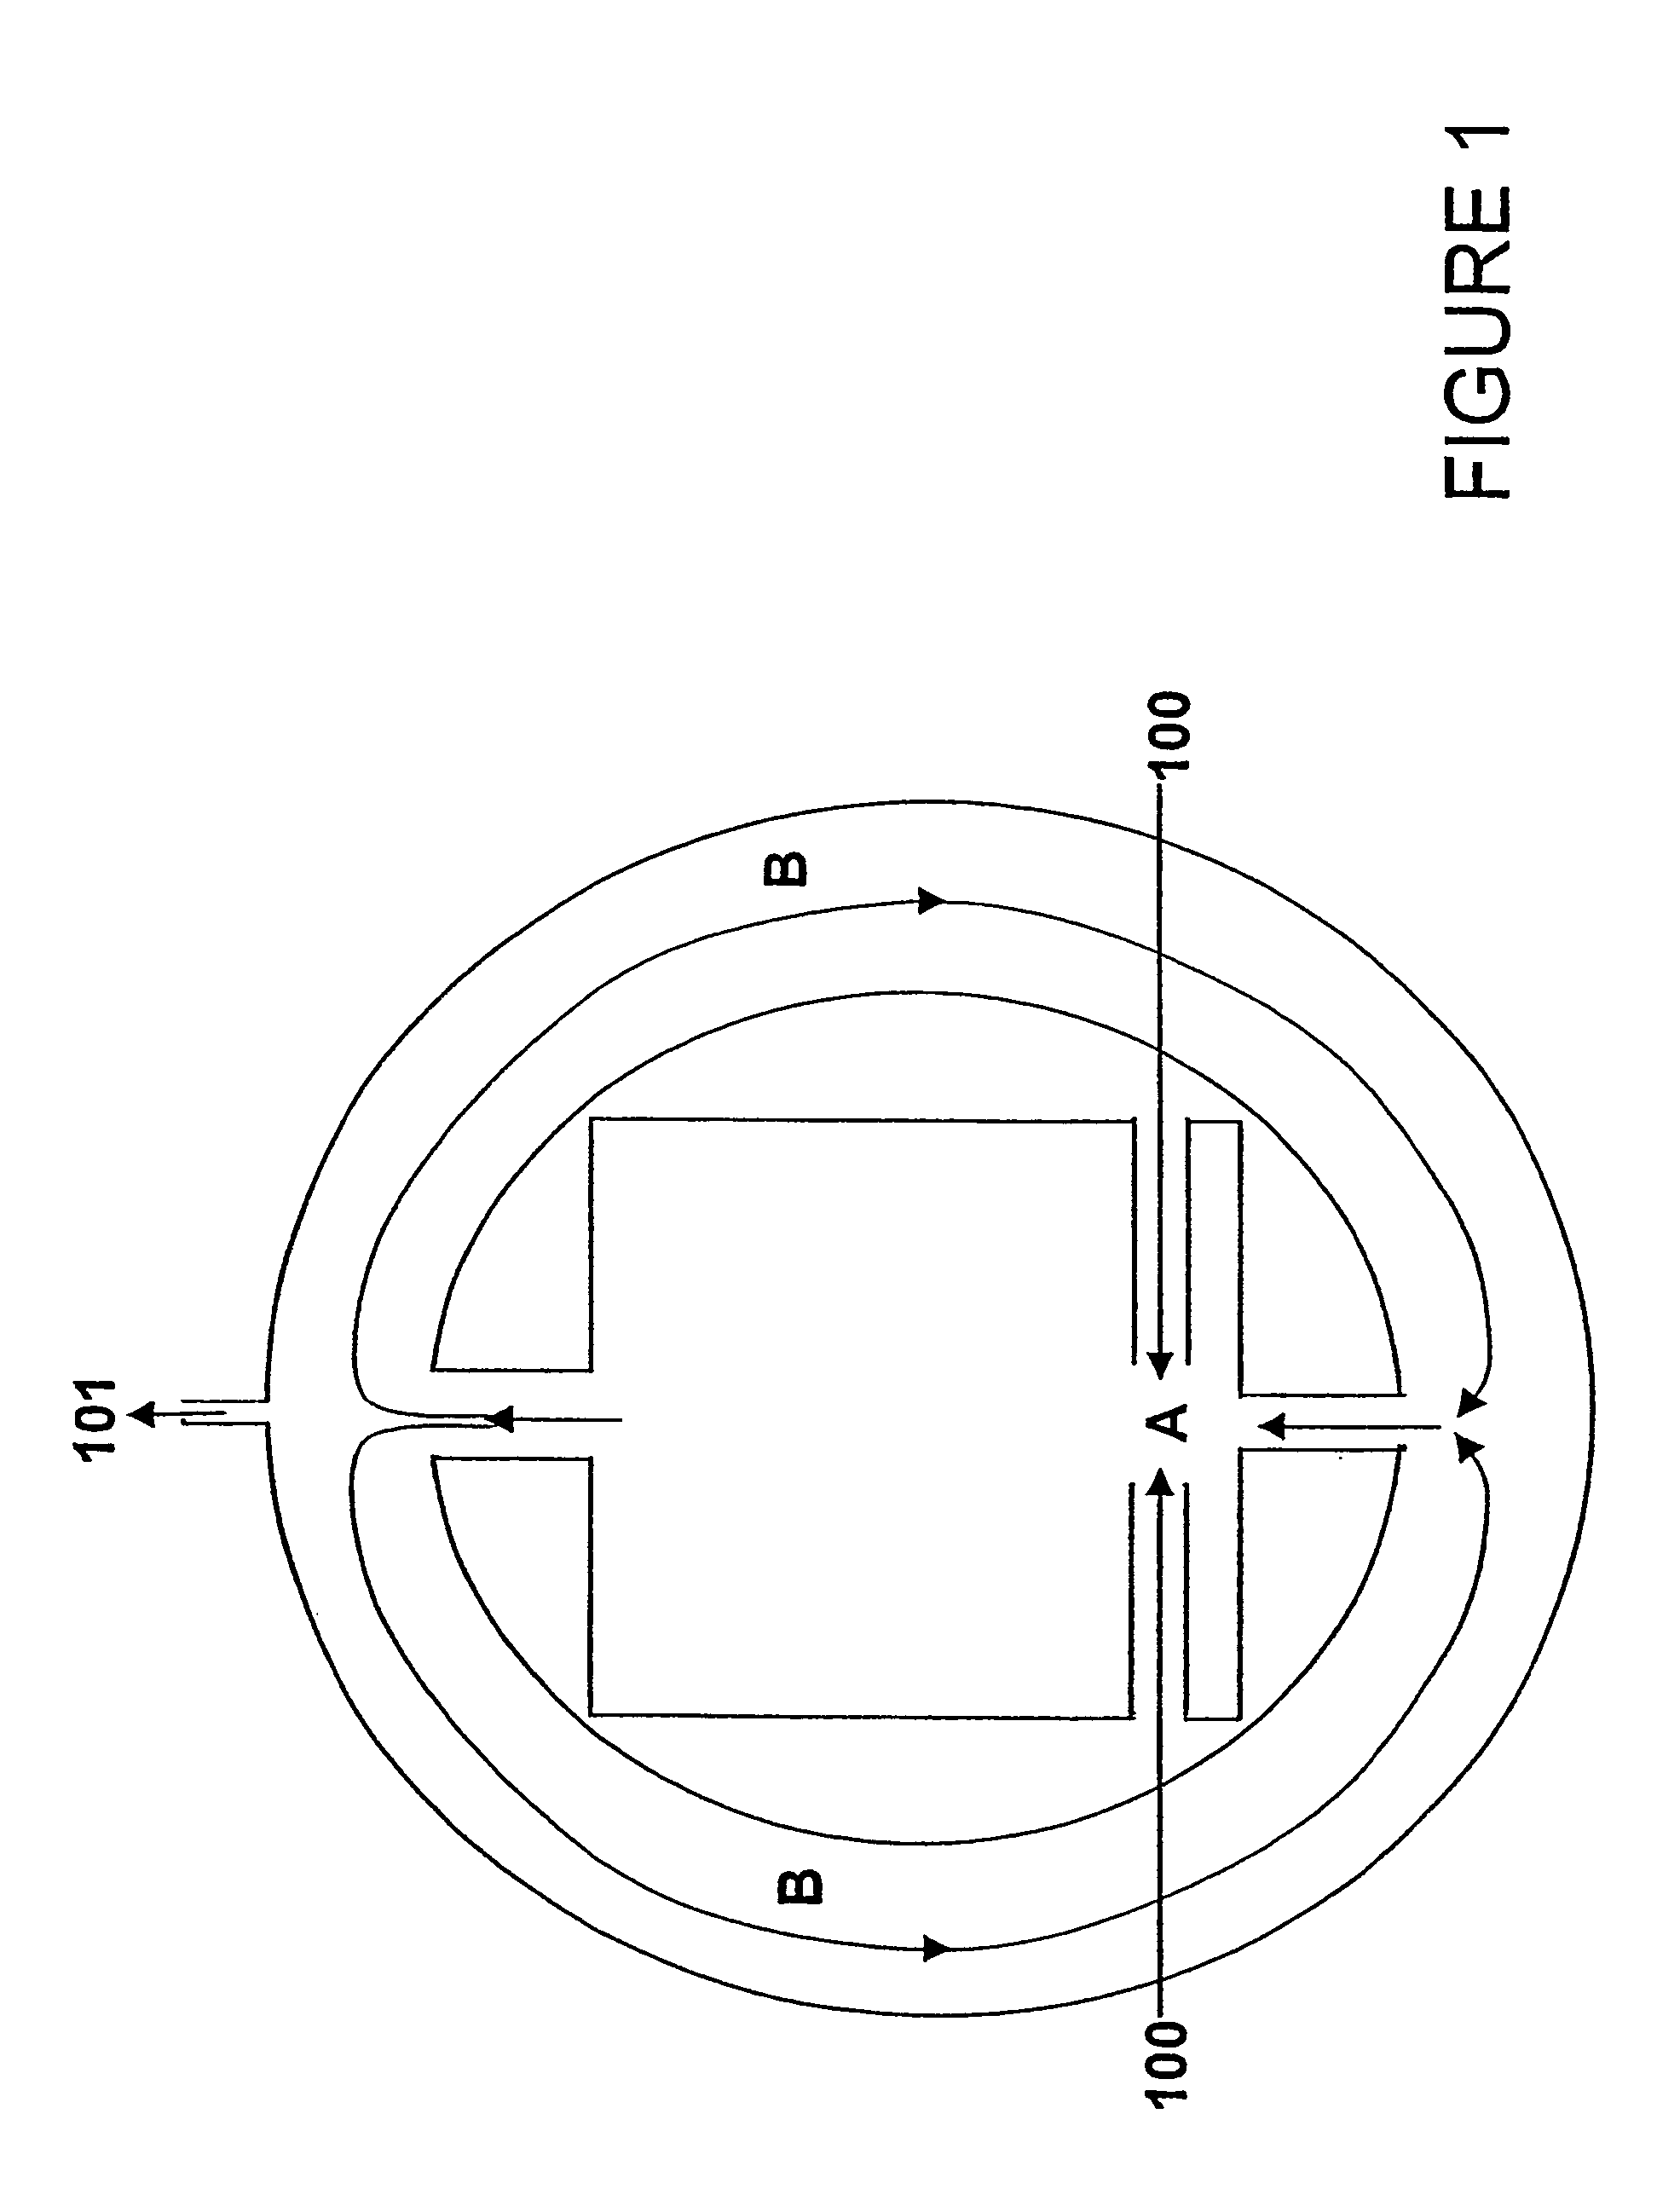 Method for combustion synthesis of fullerenes